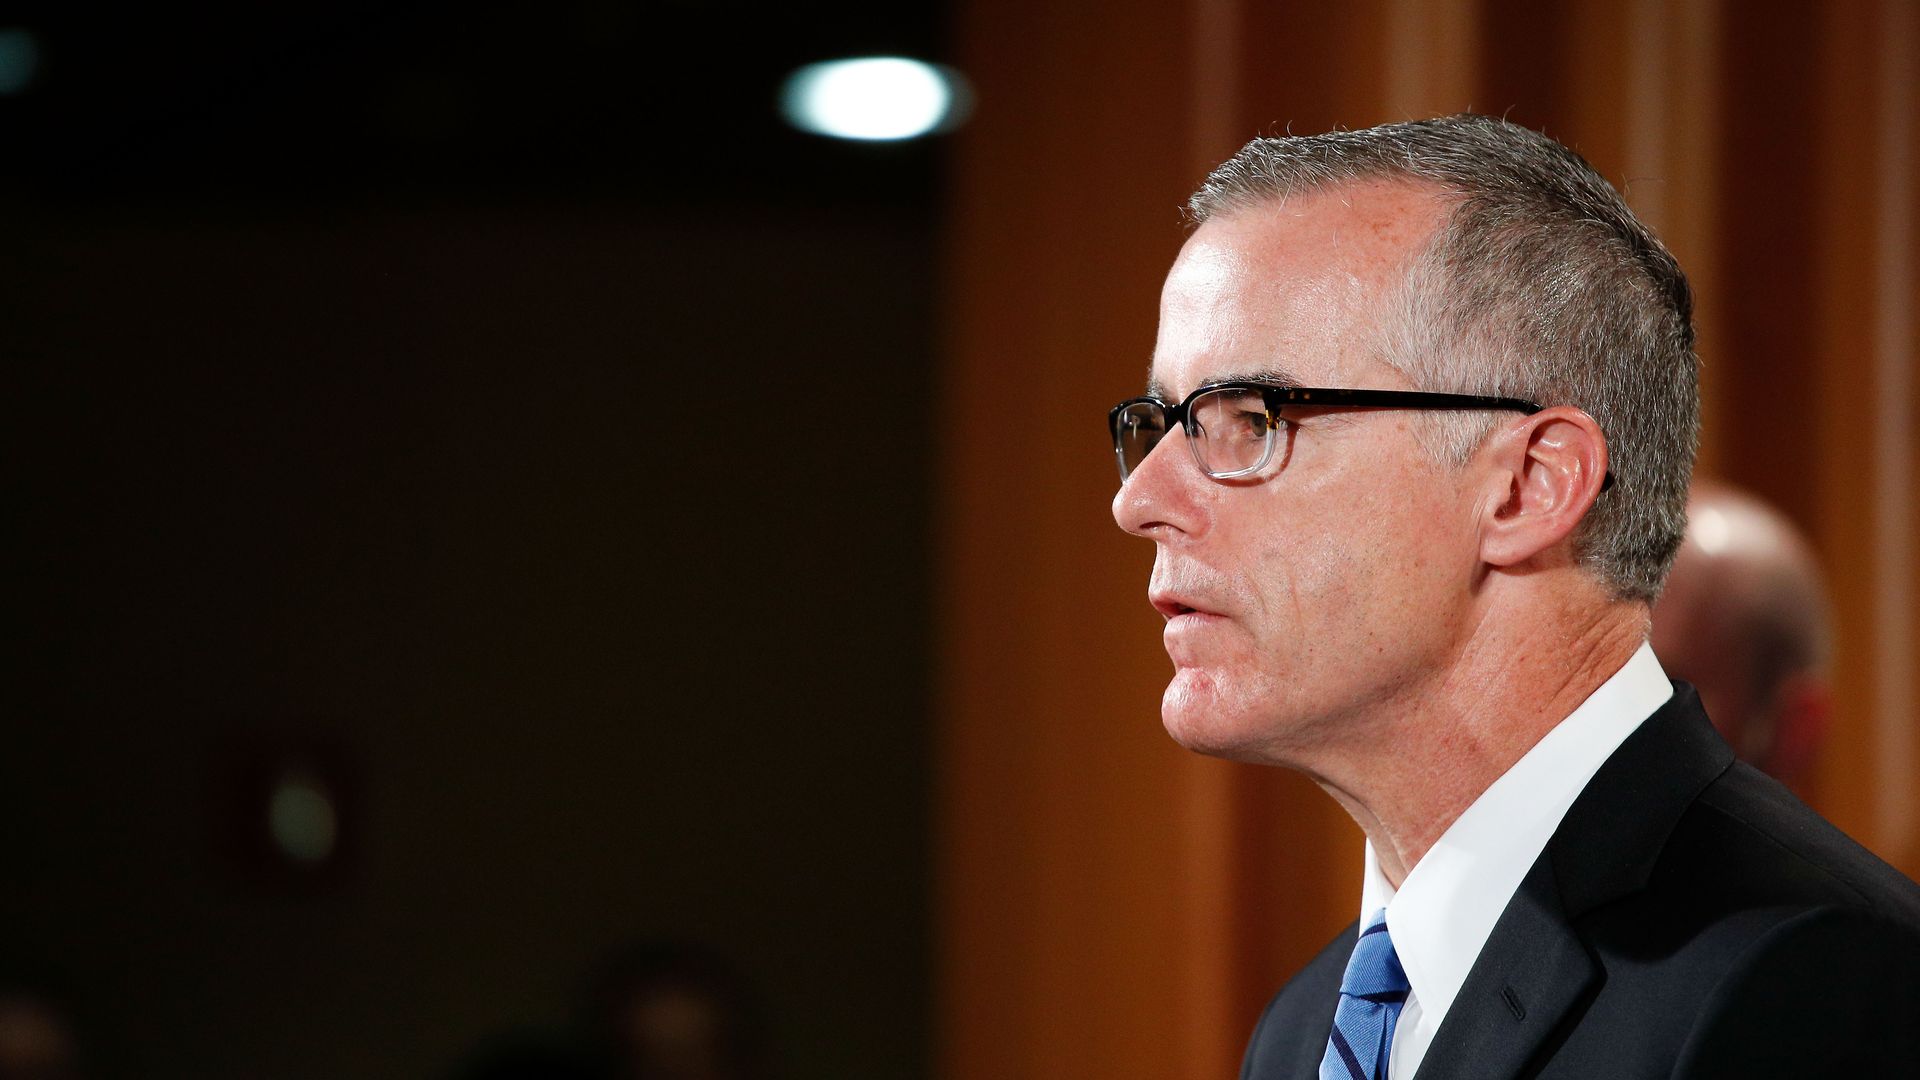 In this image, Andrew McCabe stands in a suit in front of a red curtain, looking to the left. 